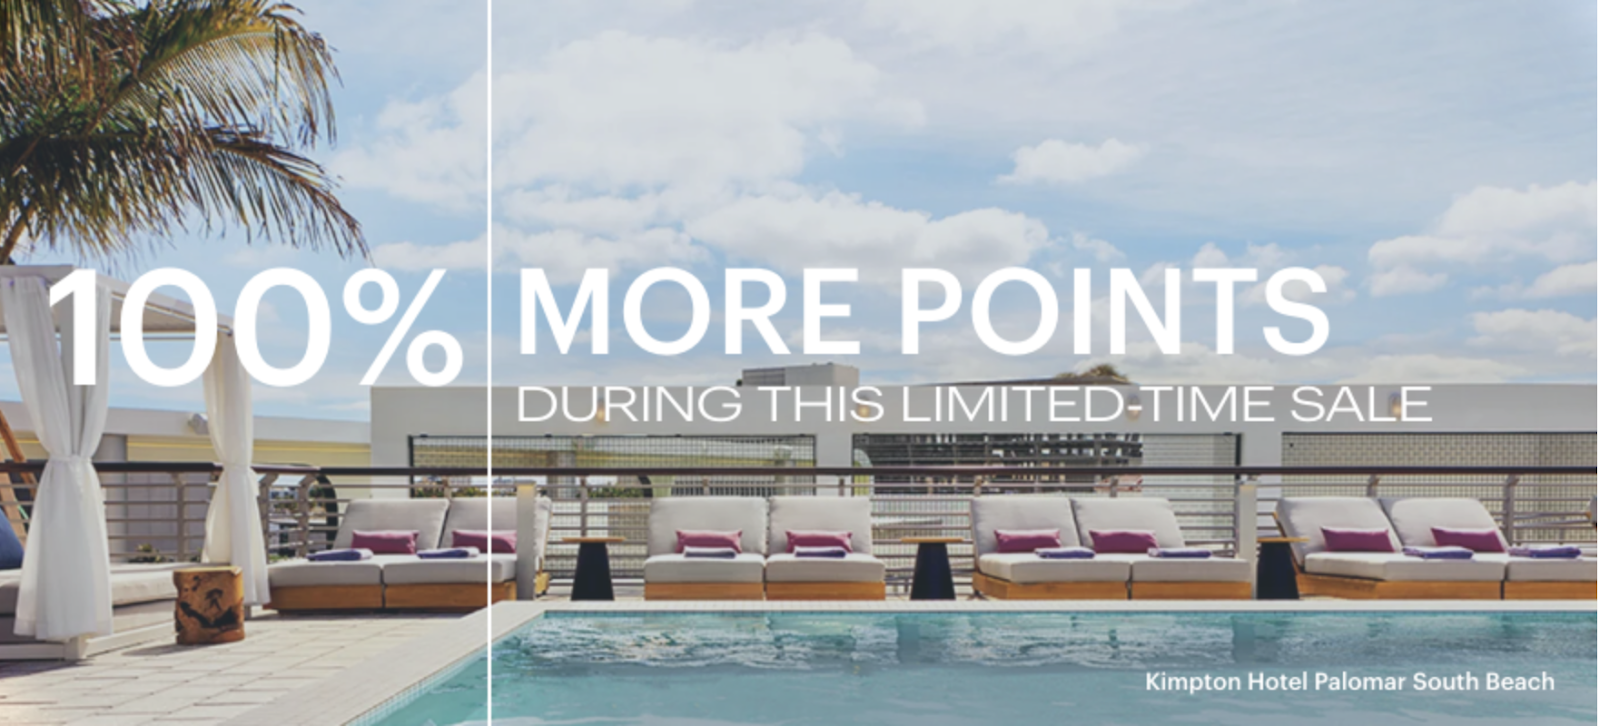 IHG Points with a 100% Bonus When Buying Points